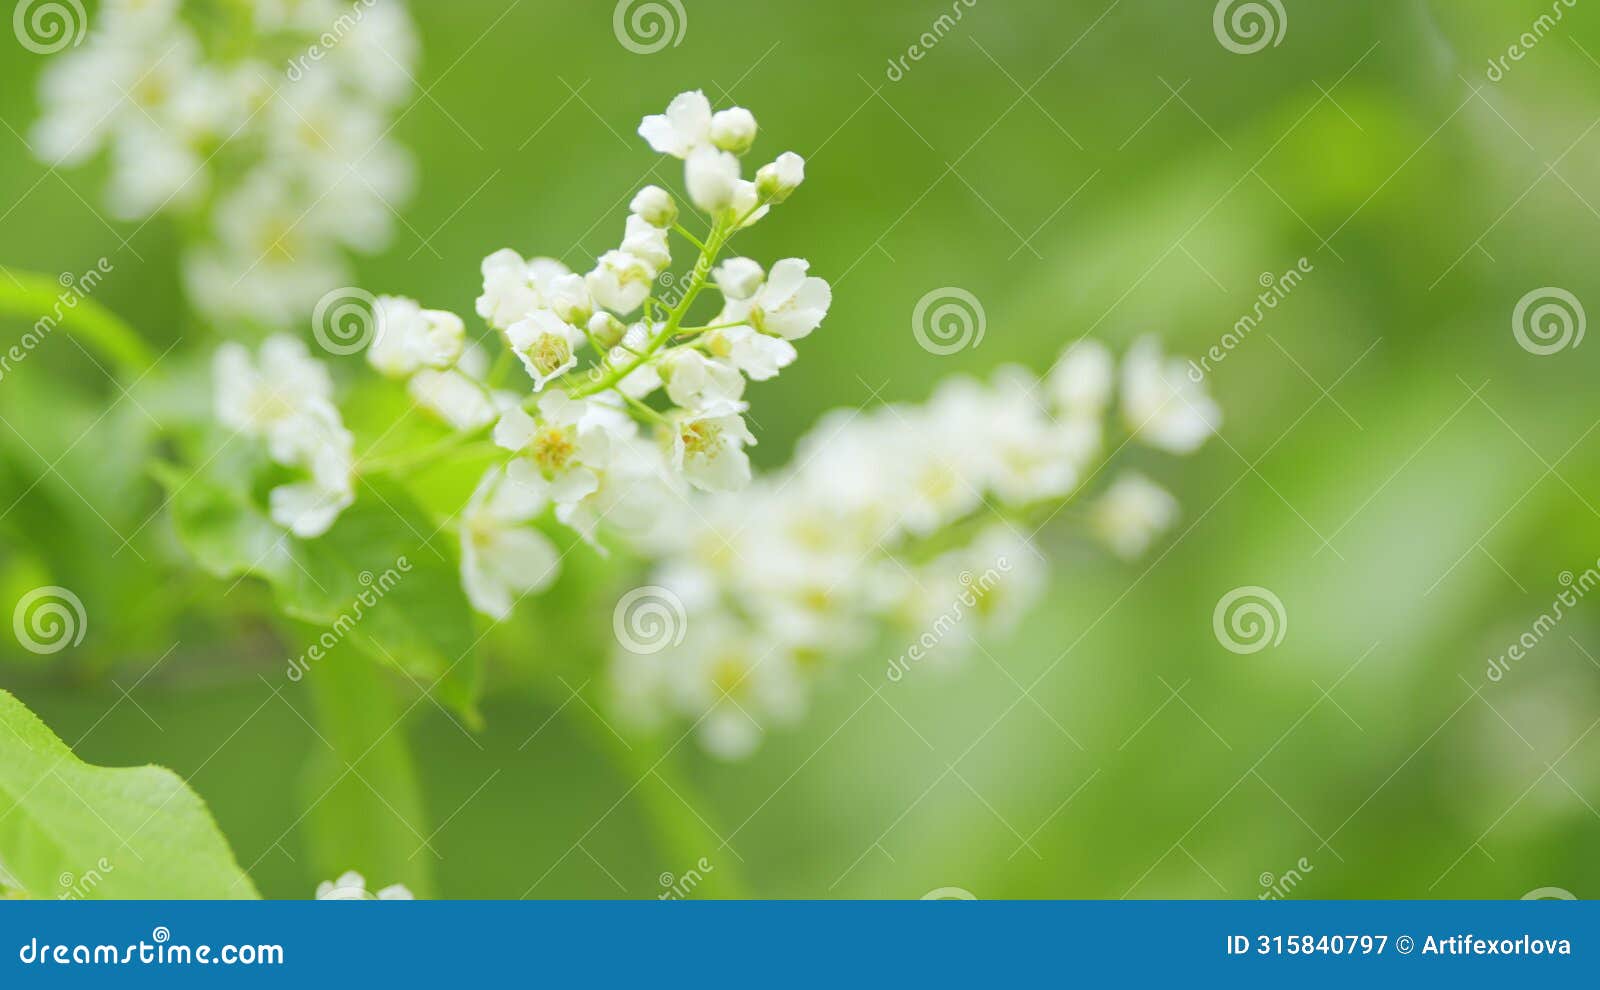 white flowers of bird cherry or rosaceae. this is a cherry variety. spring blooming. slow motion.